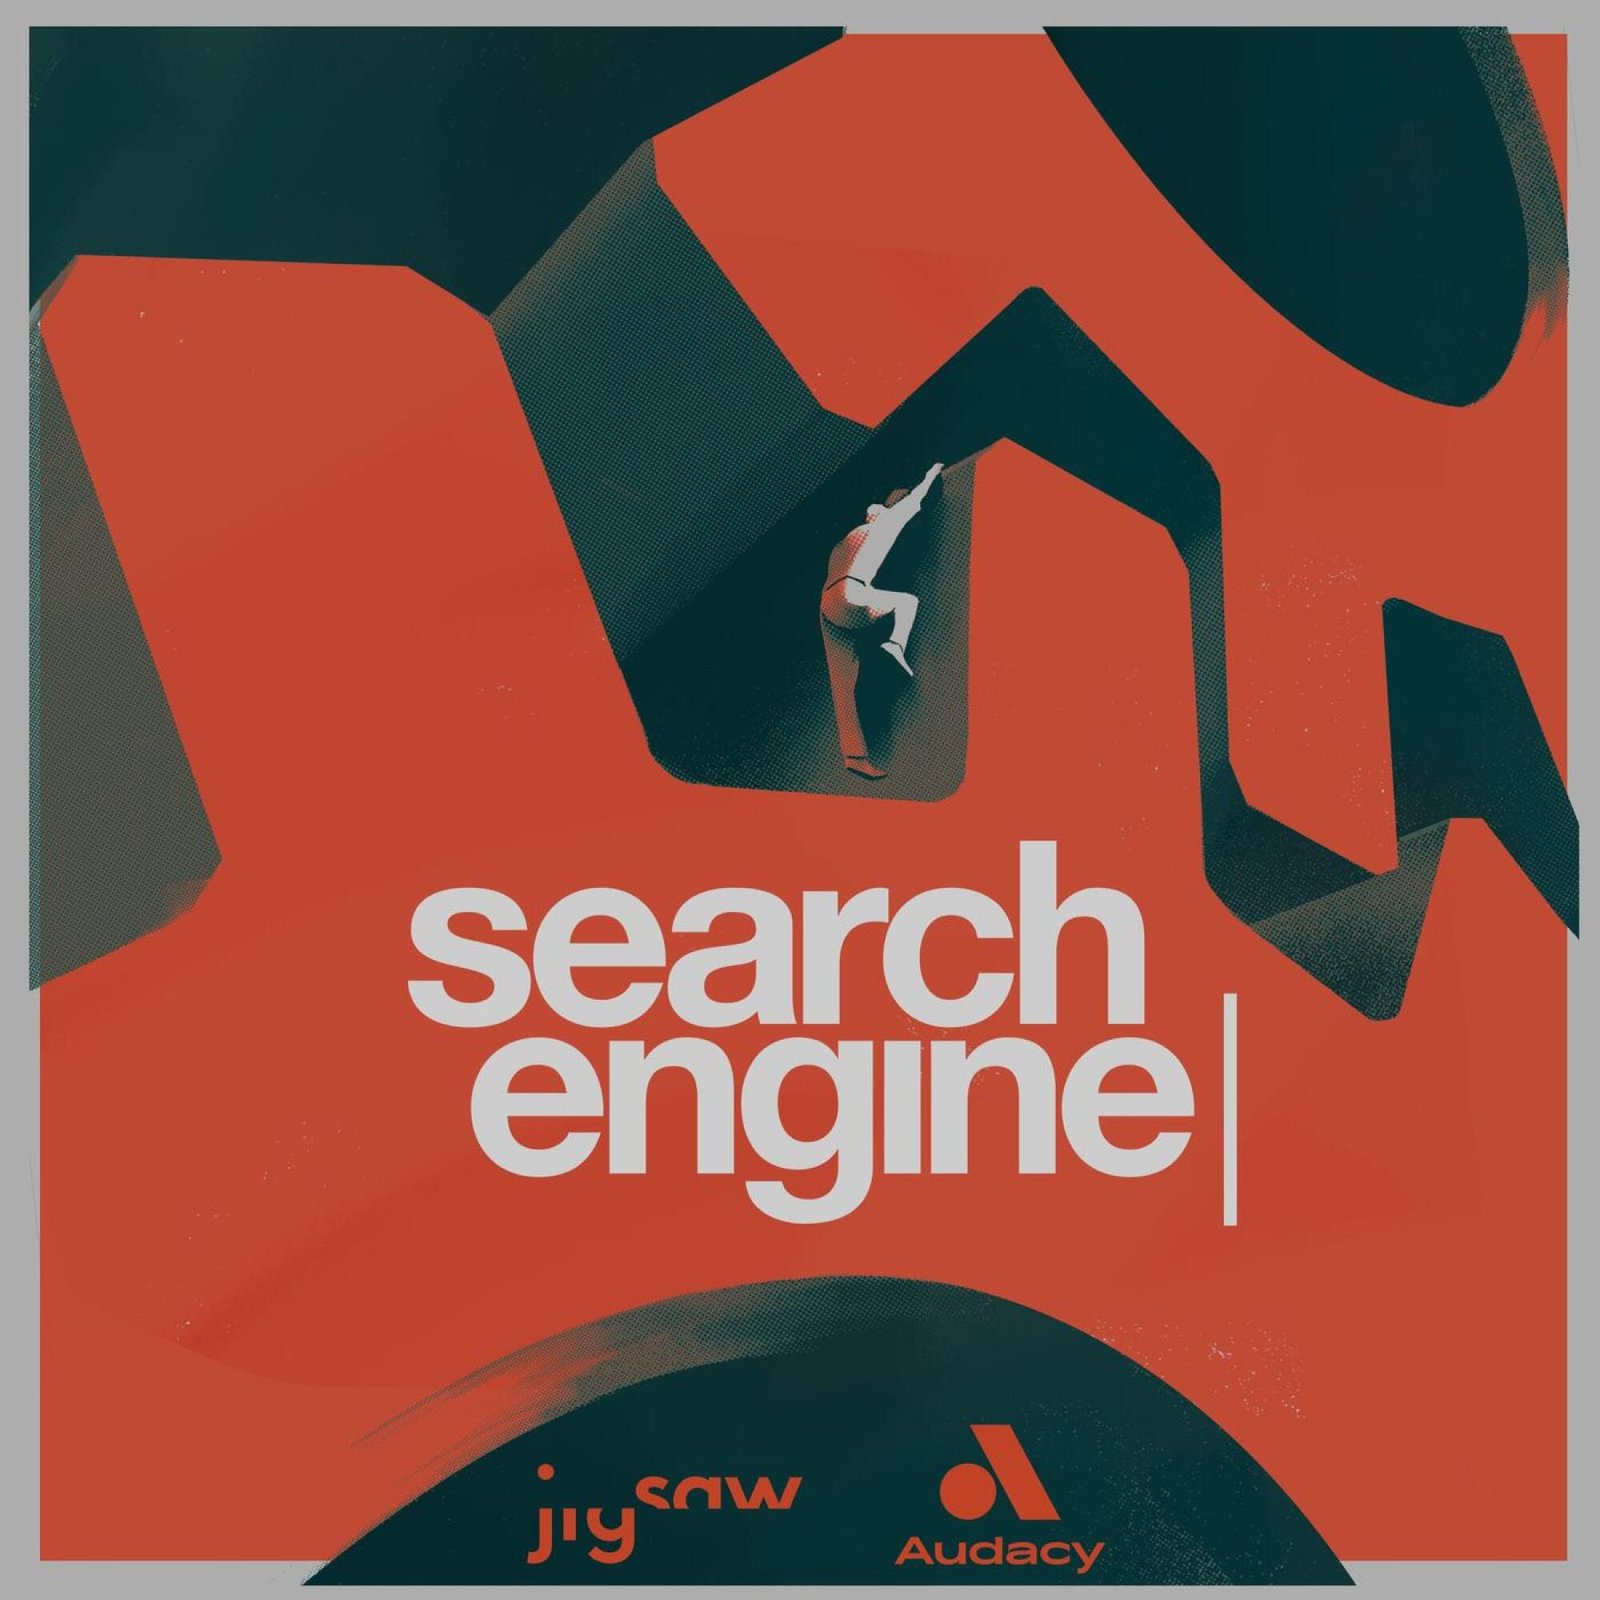 Search engine podcast logo